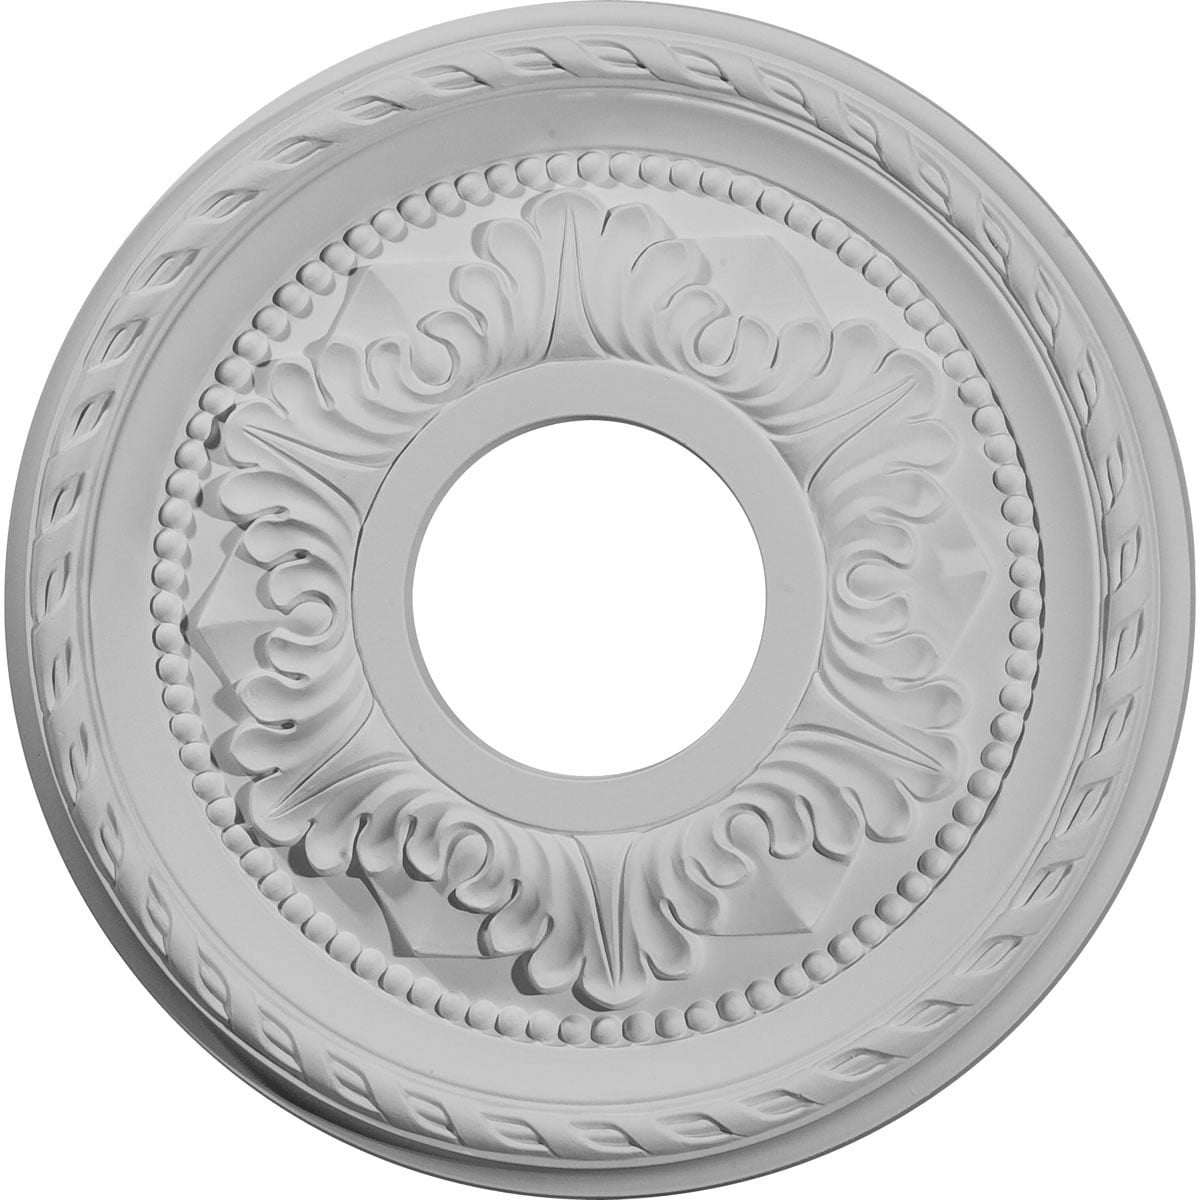 41"OD x 7 1/2"ID x 1 5/8"P Ceiling Medallion Fits Canopies up to 3 1/4" 